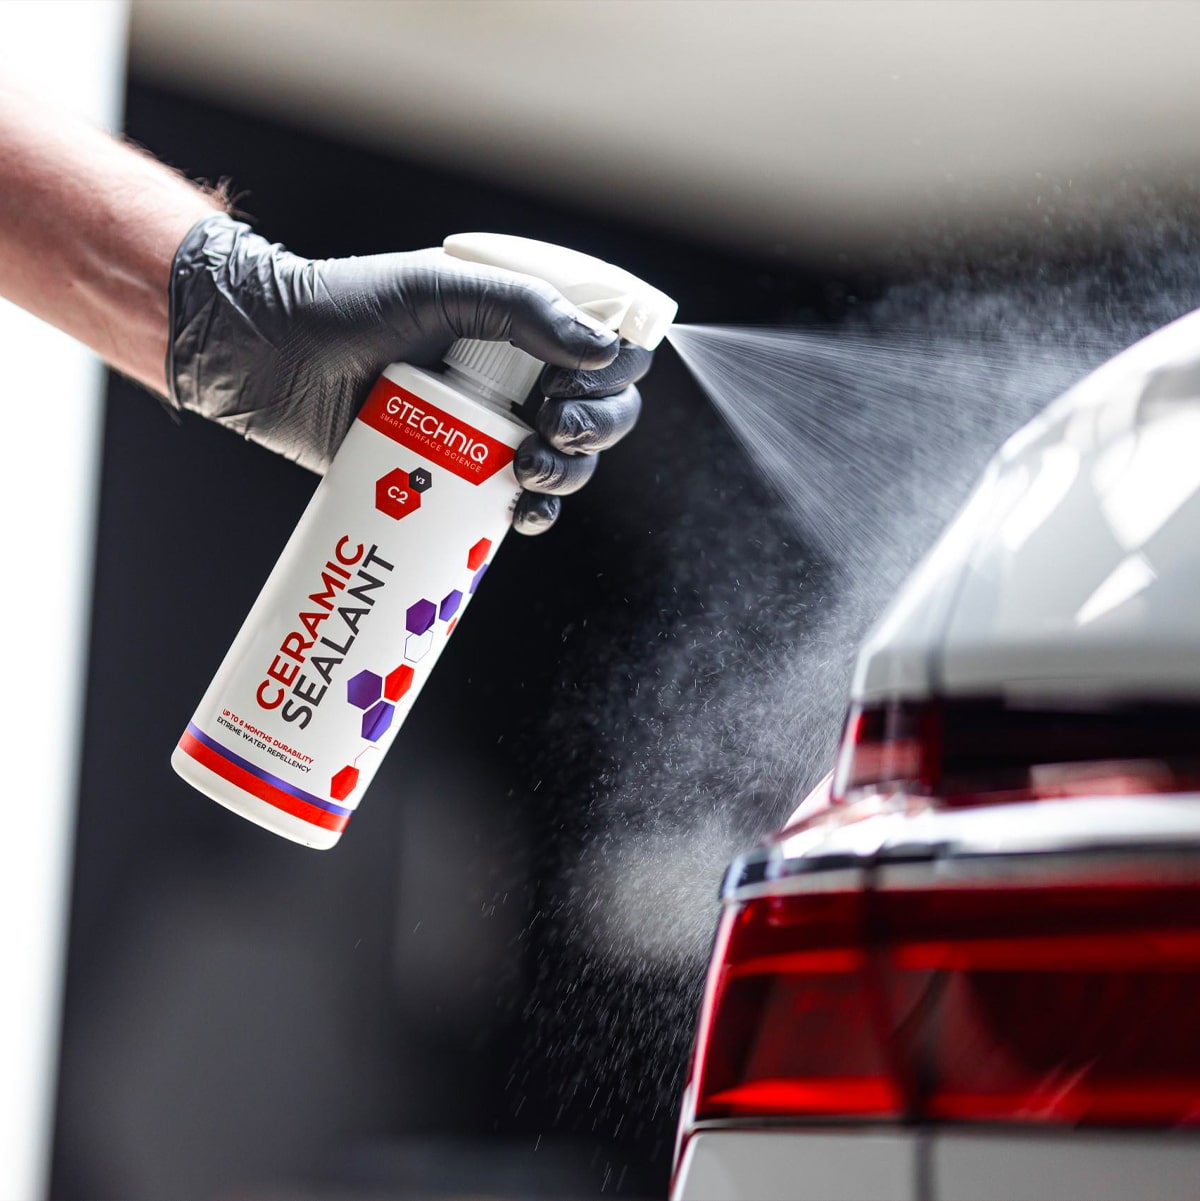 Get your car ready for summer with ceramic coating